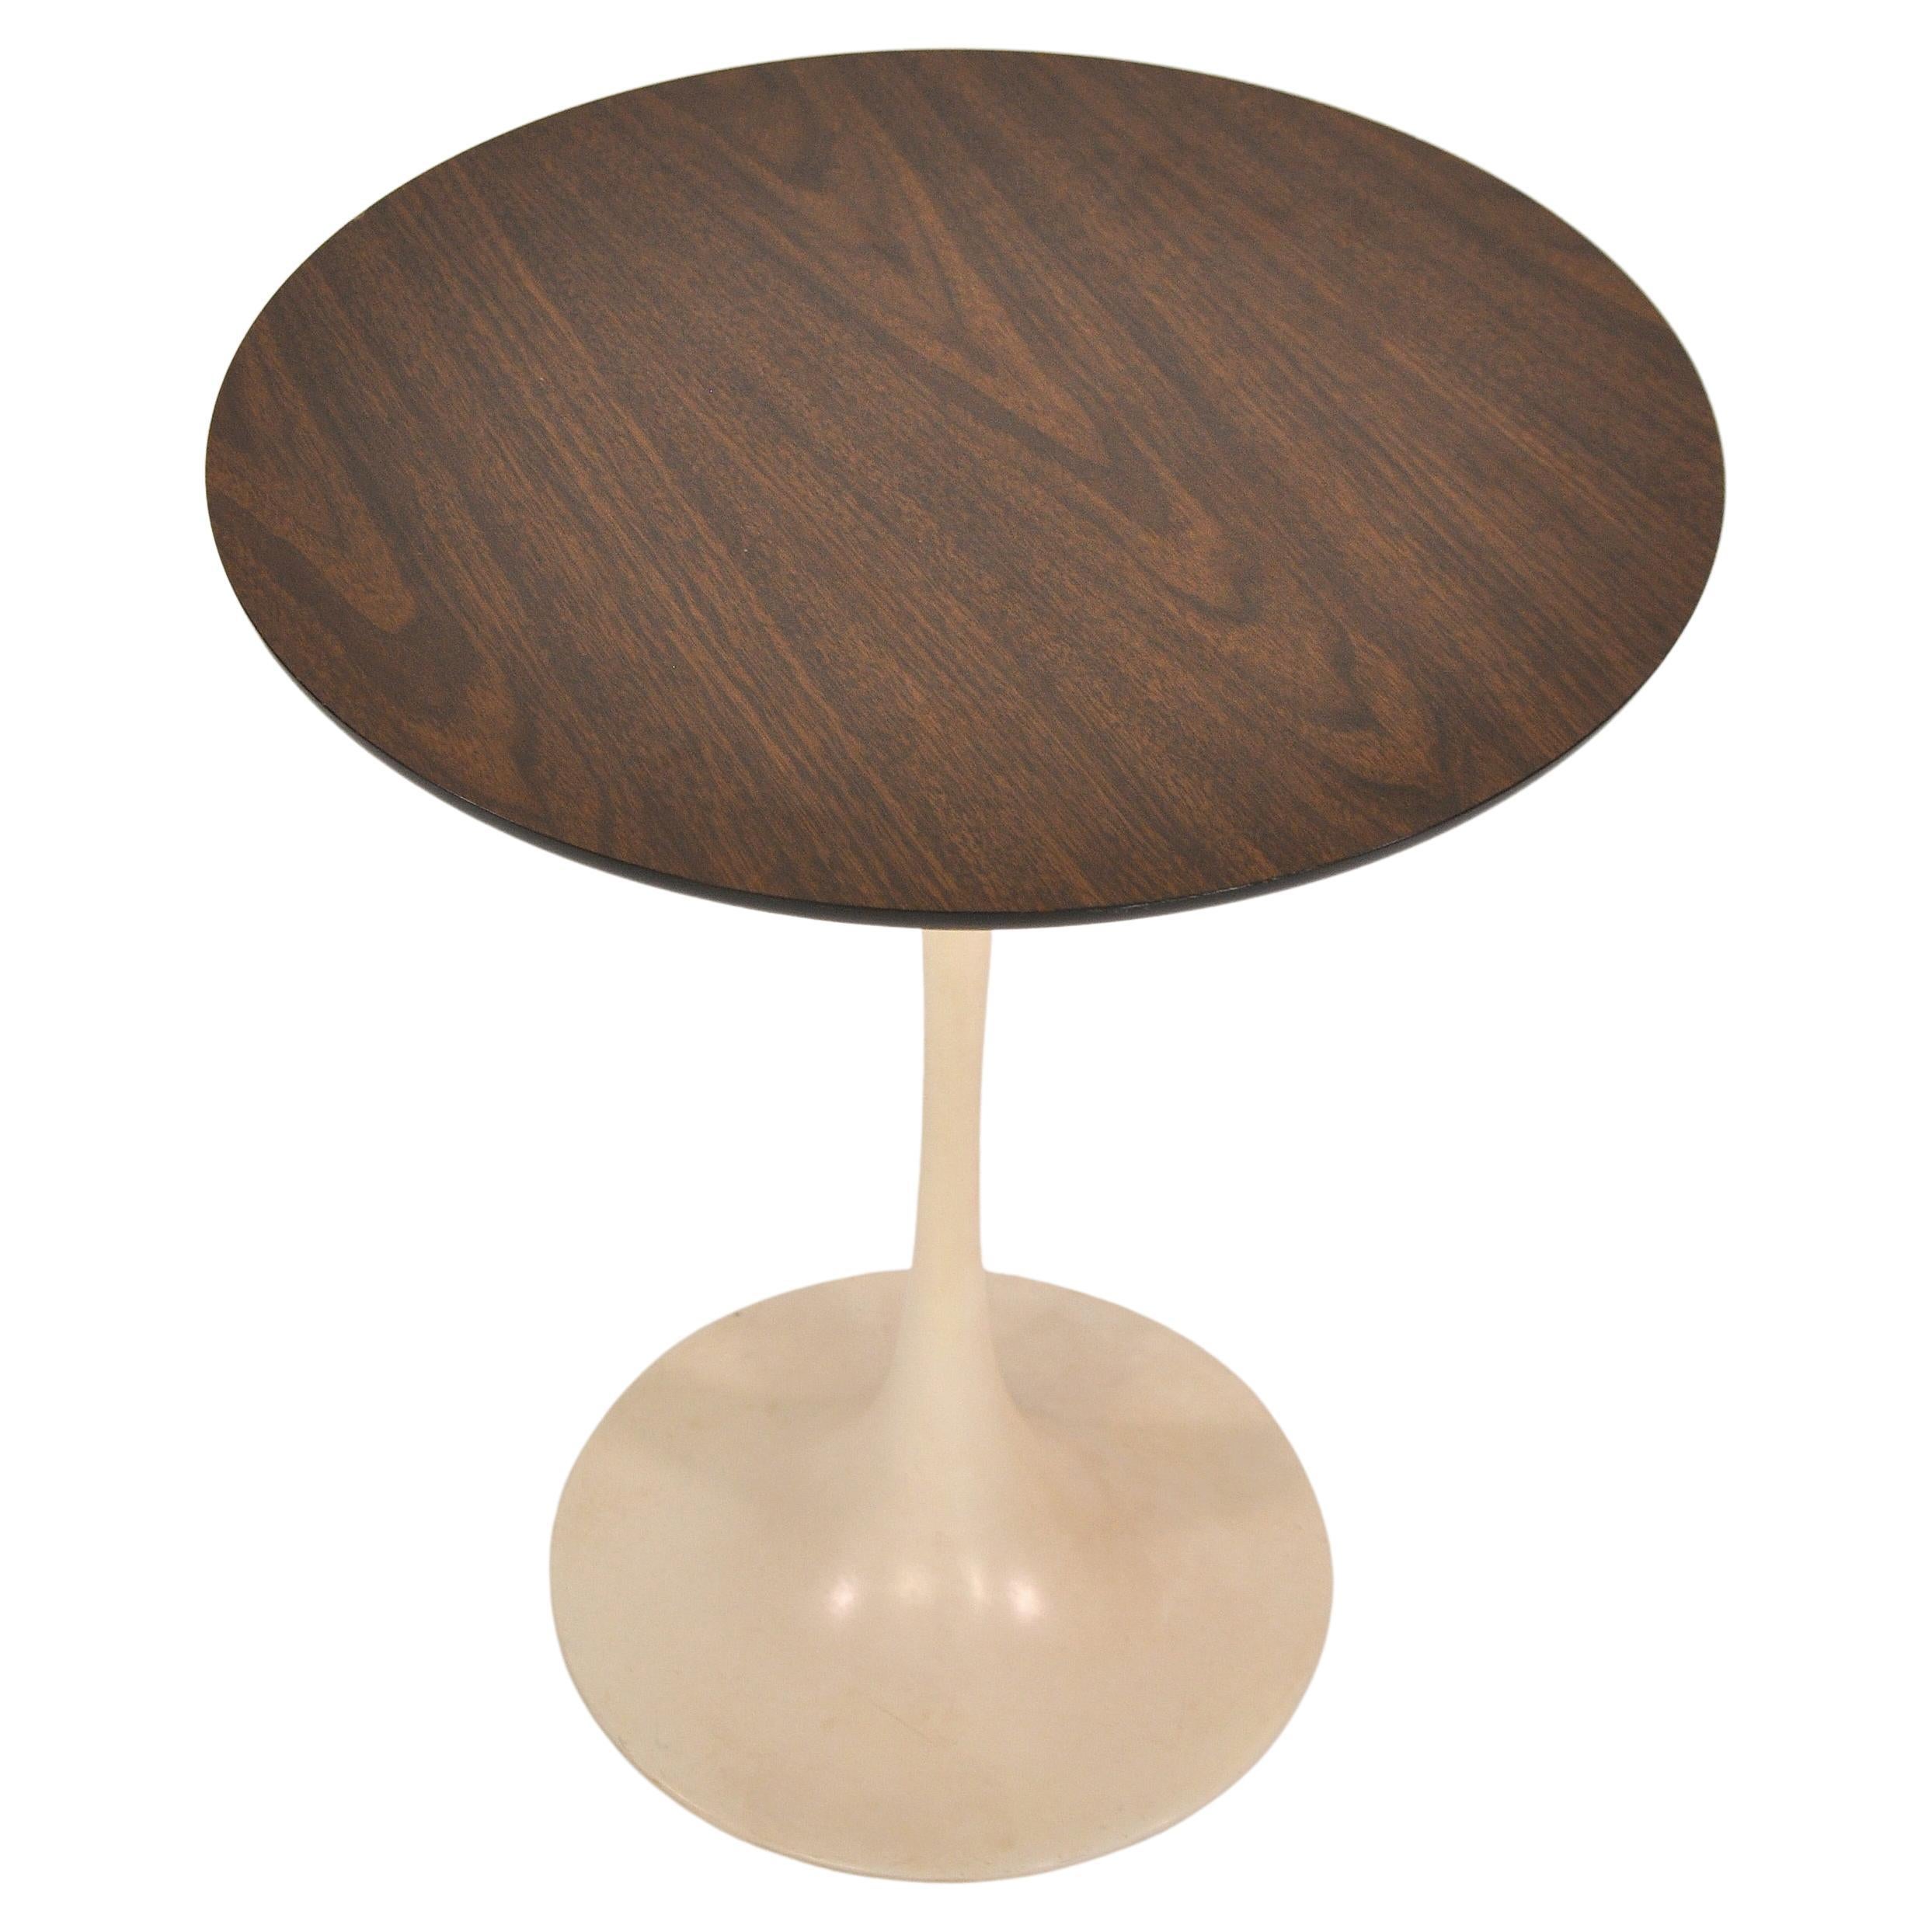 A vintage 1960s Mid-Century Modern Tulip occasional table designed by Eero Saarinen for Knoll. The round tabletop features a walnut with clear laminate coating that Knoll only produced for a very short time due to high production costs. It allows